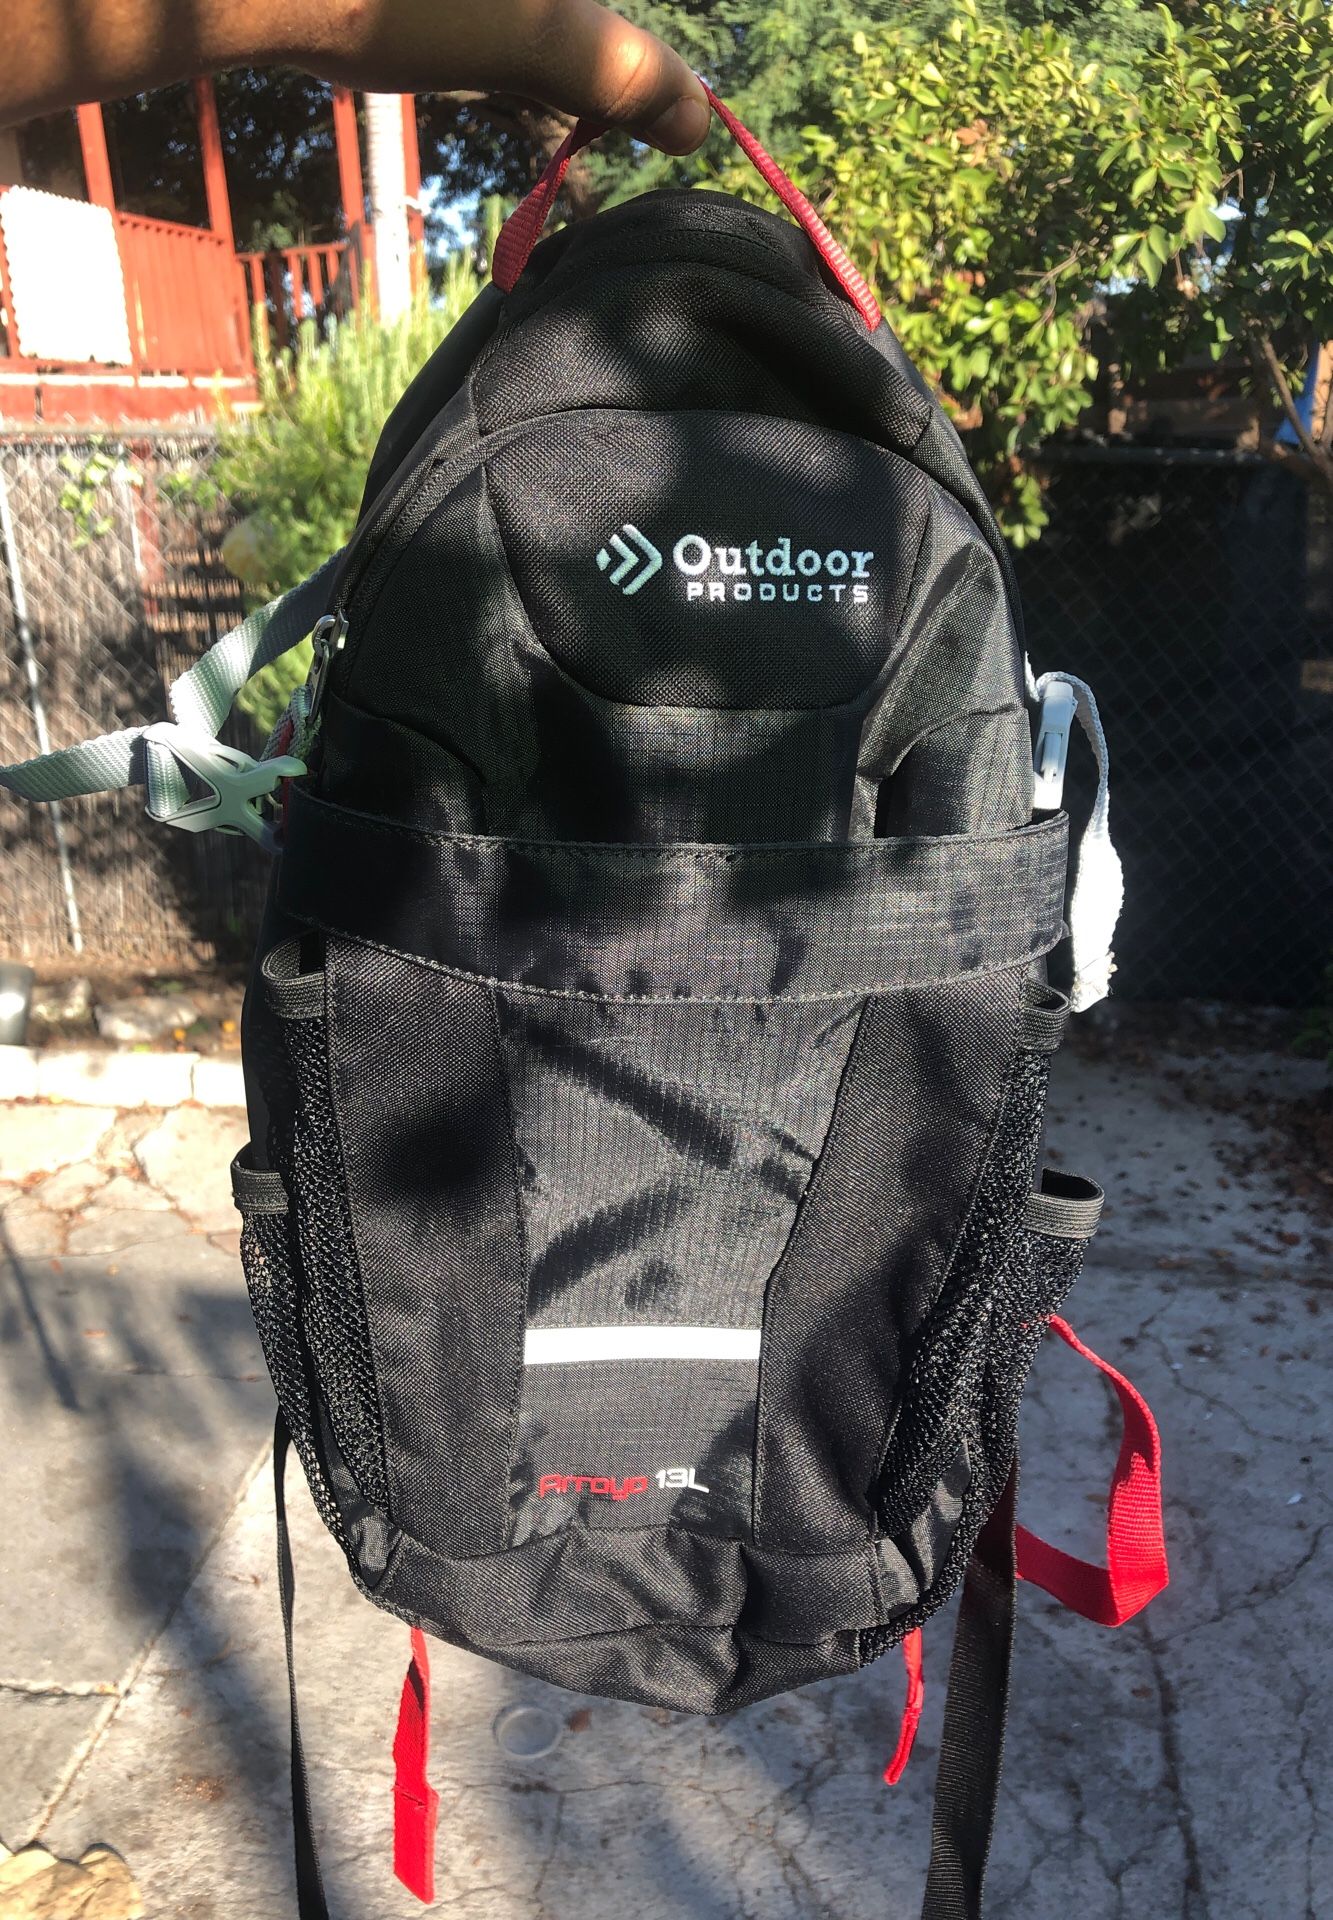 Outdoor products backpack (Hydration pack)